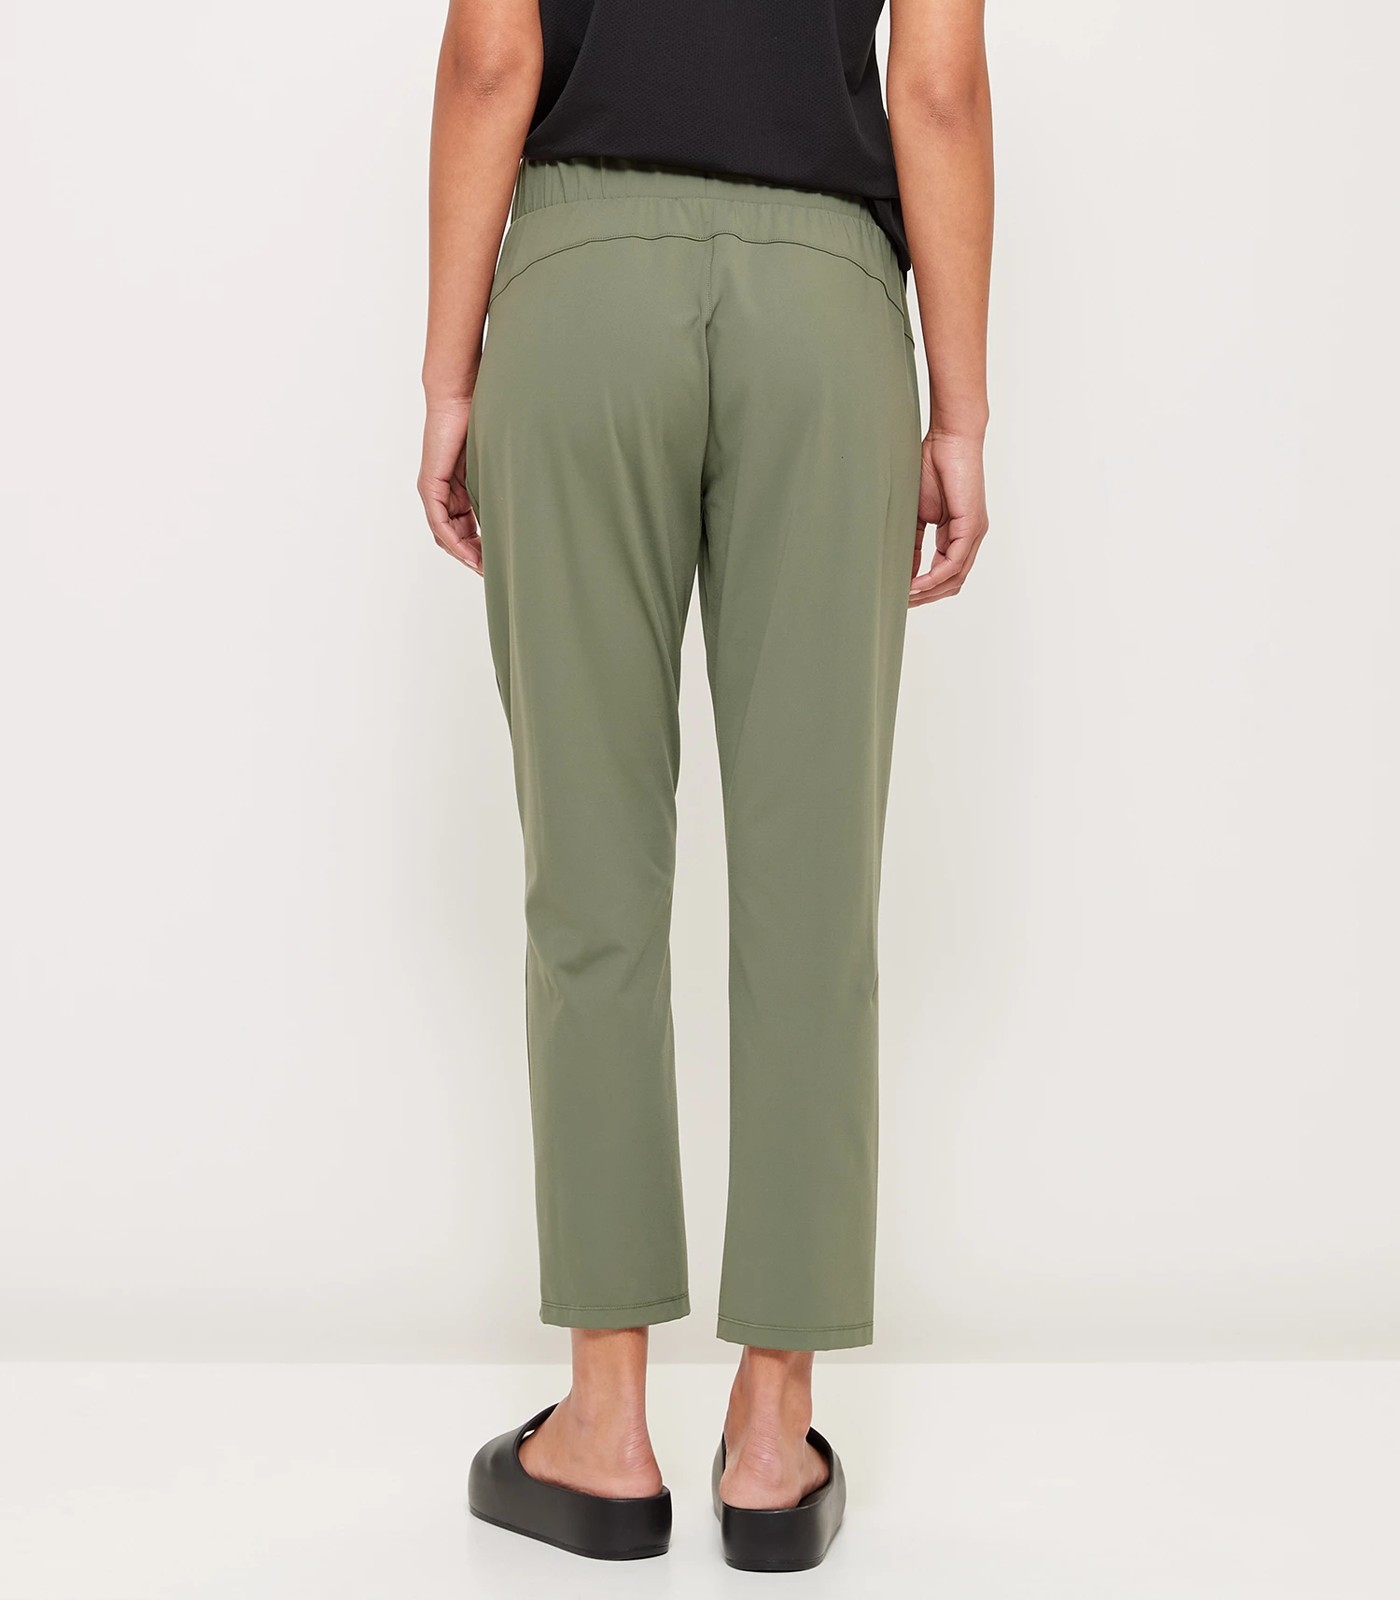 Active 7/8 Length Relaxed Travel Pants - Olive Green